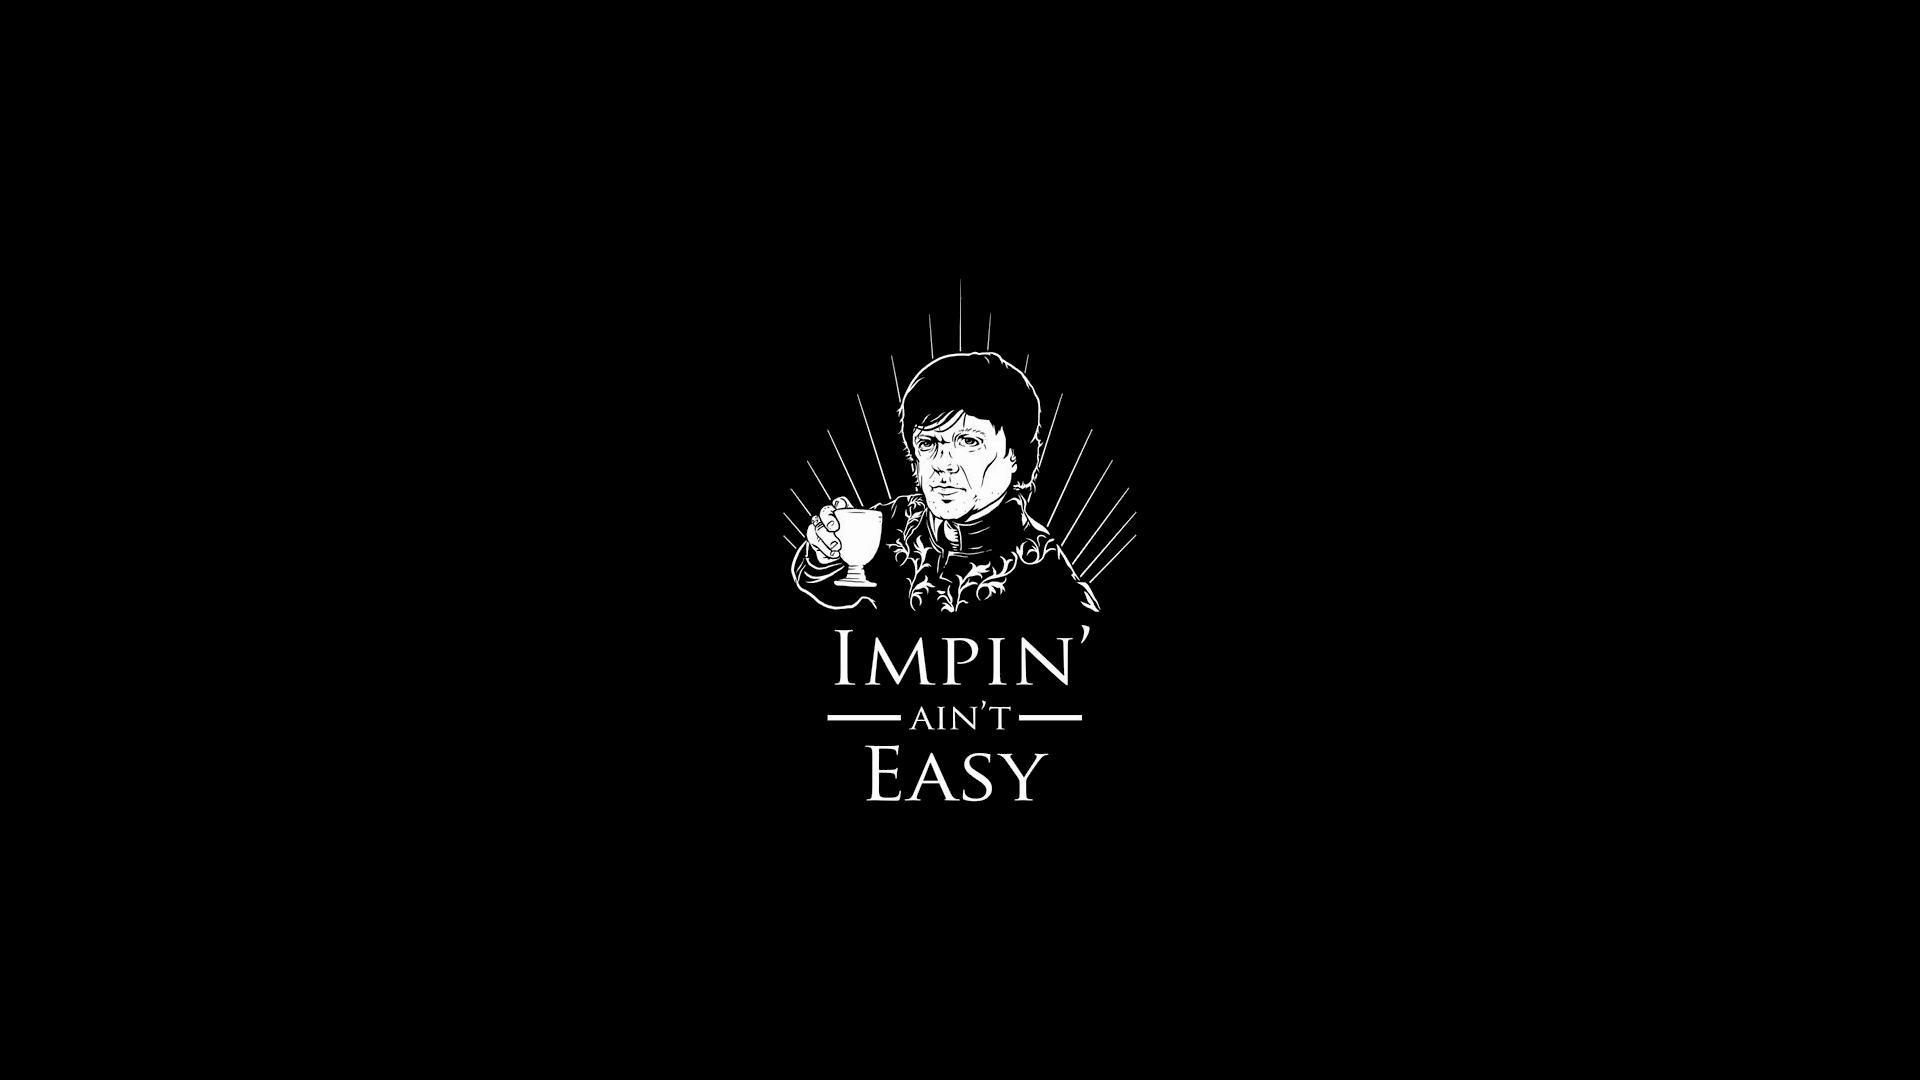 Thrones tyrion lannister easy imp simple background wallpaper 82372